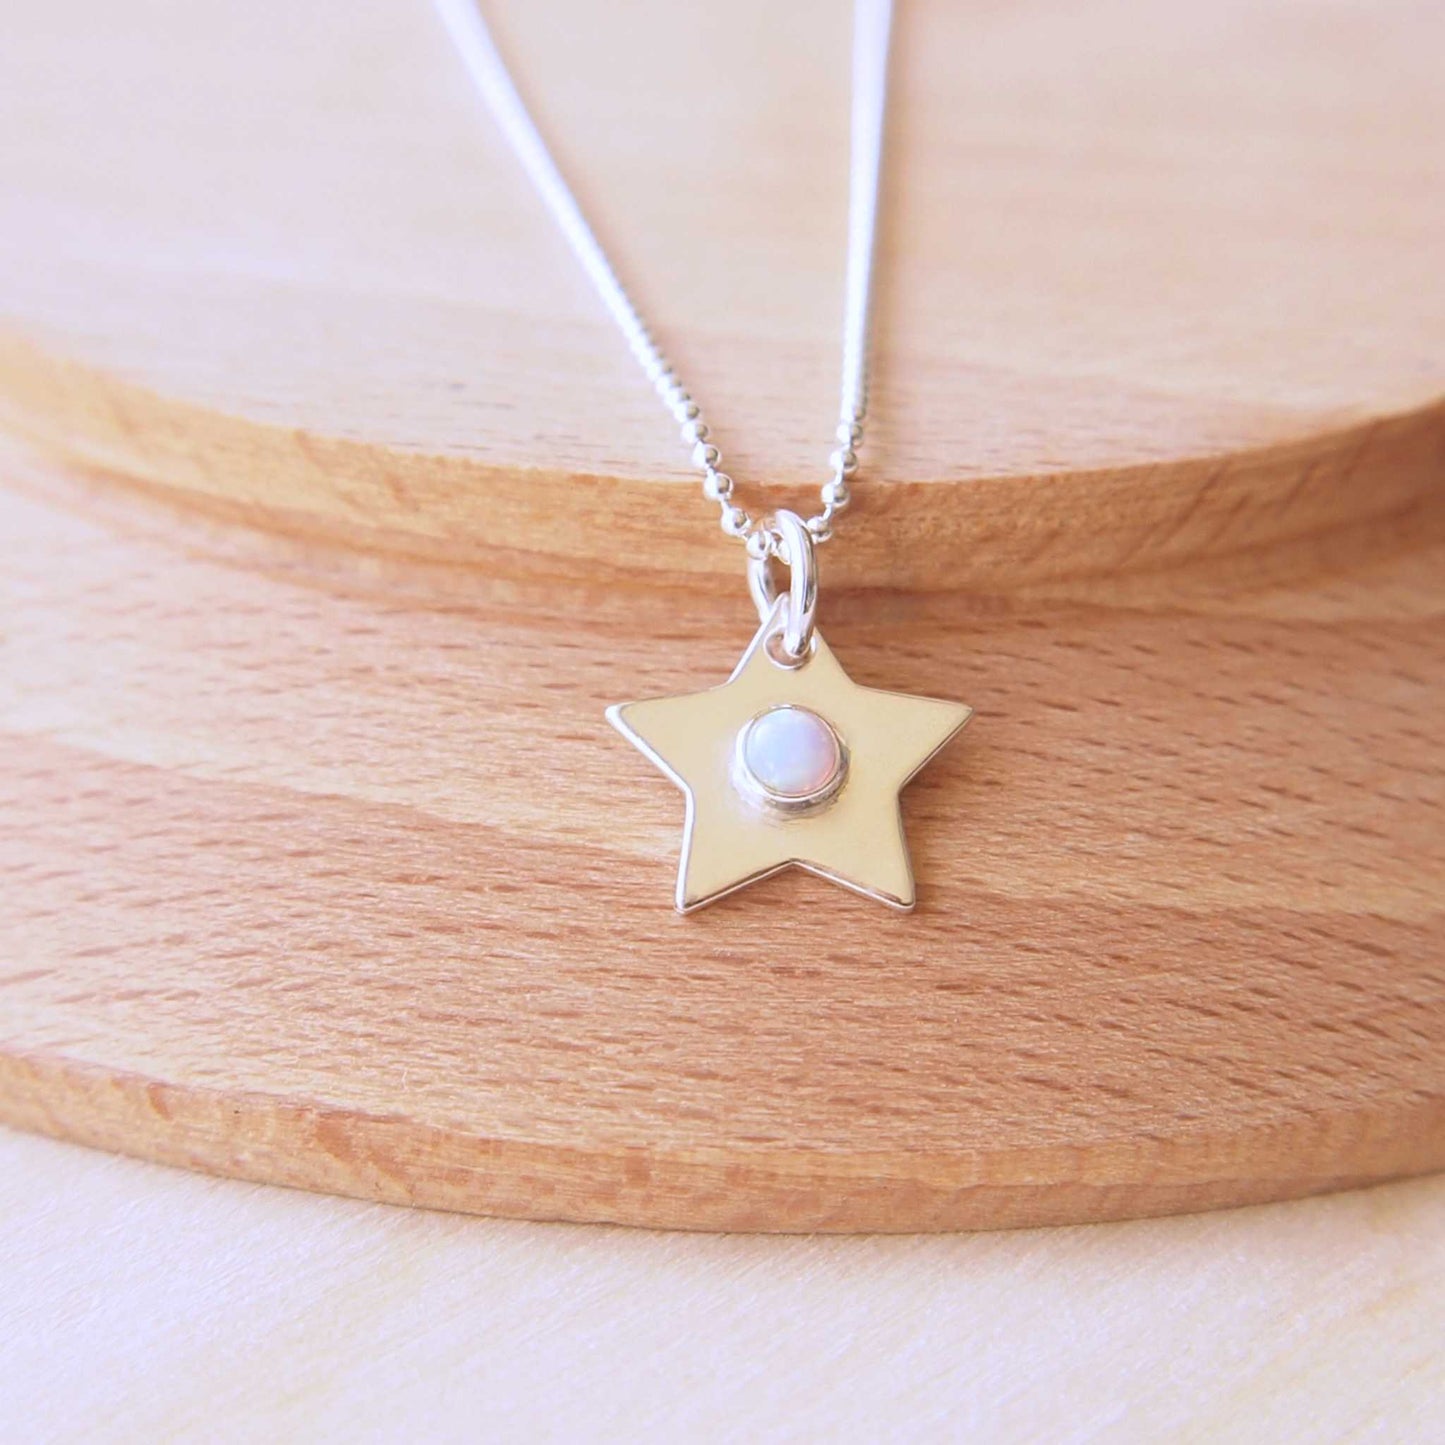 October Birthstone star charm necklace in Sterling SIlver with Opal centre. Handmade in Scotland by maram jewellery